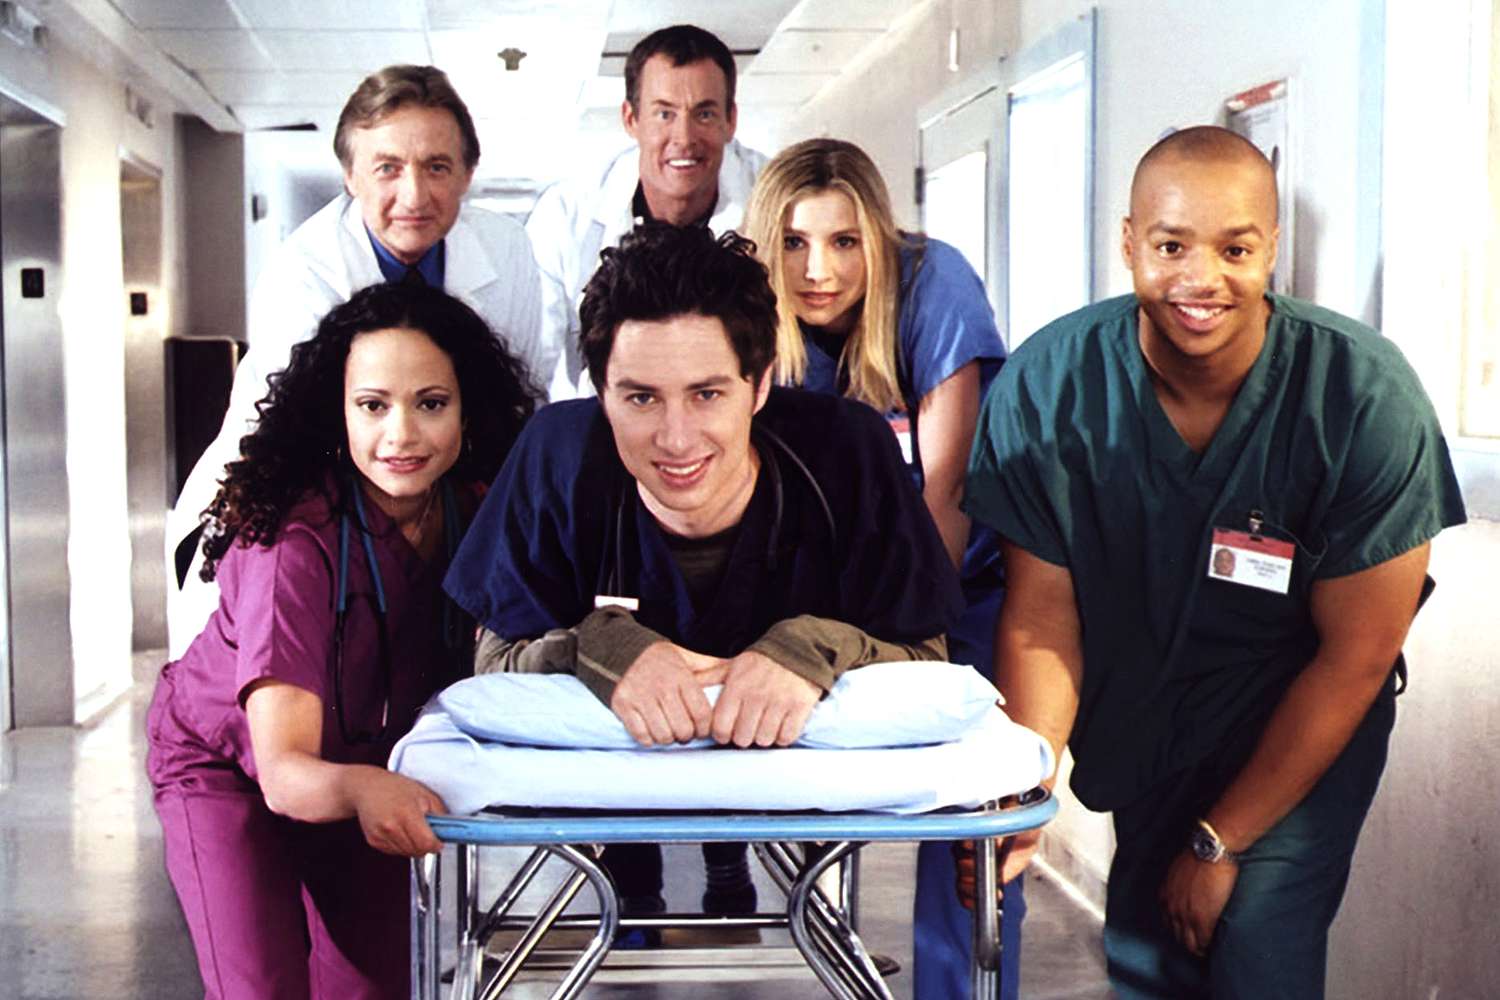 What are the Scrubs cast up to now?